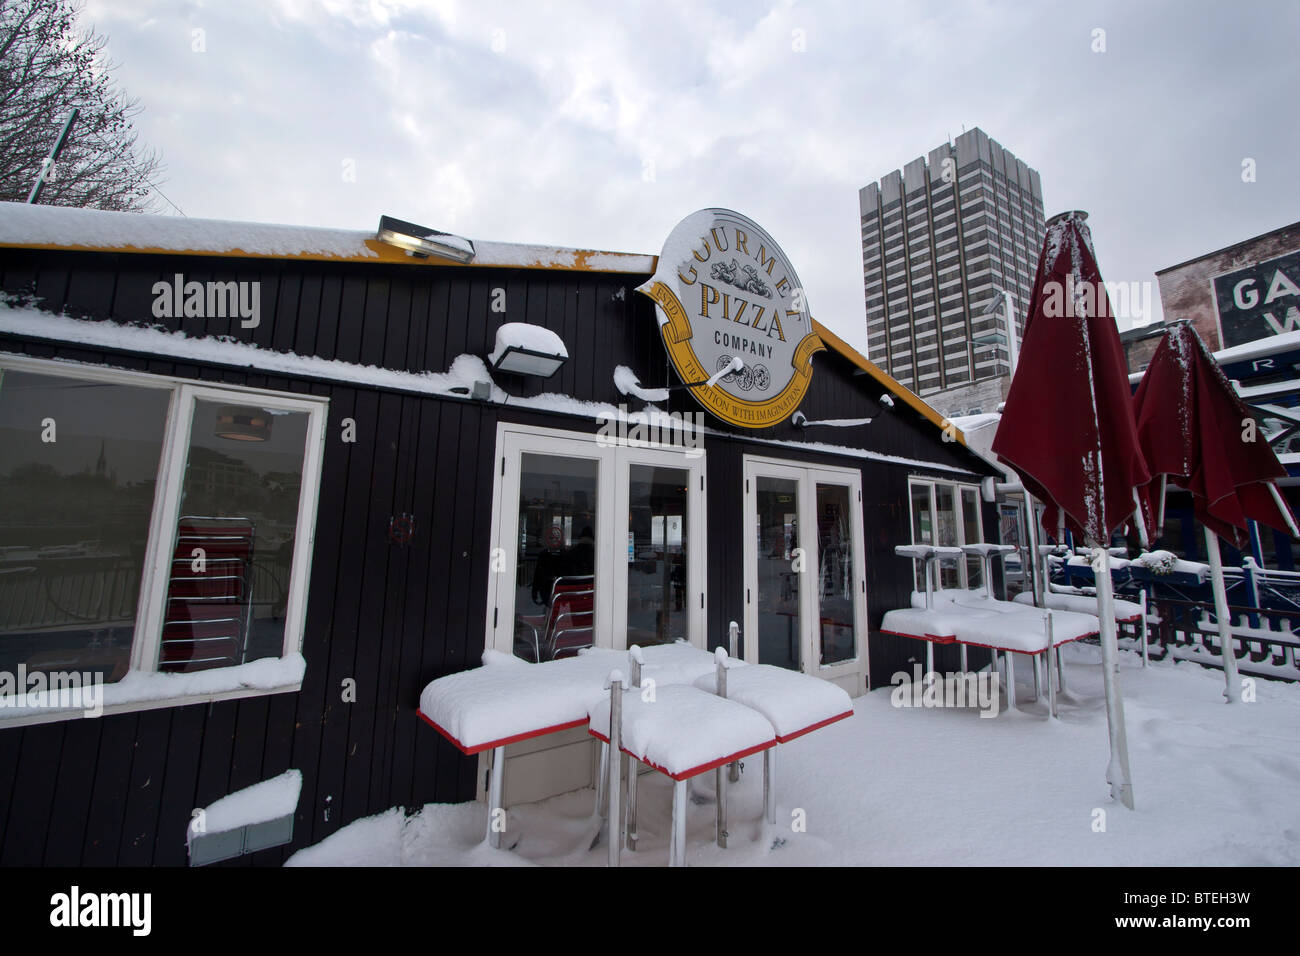 Gourmet Pizza Restaurant with the ITV building in the background, London Gabriels Wharf in the Snow Stock Photo